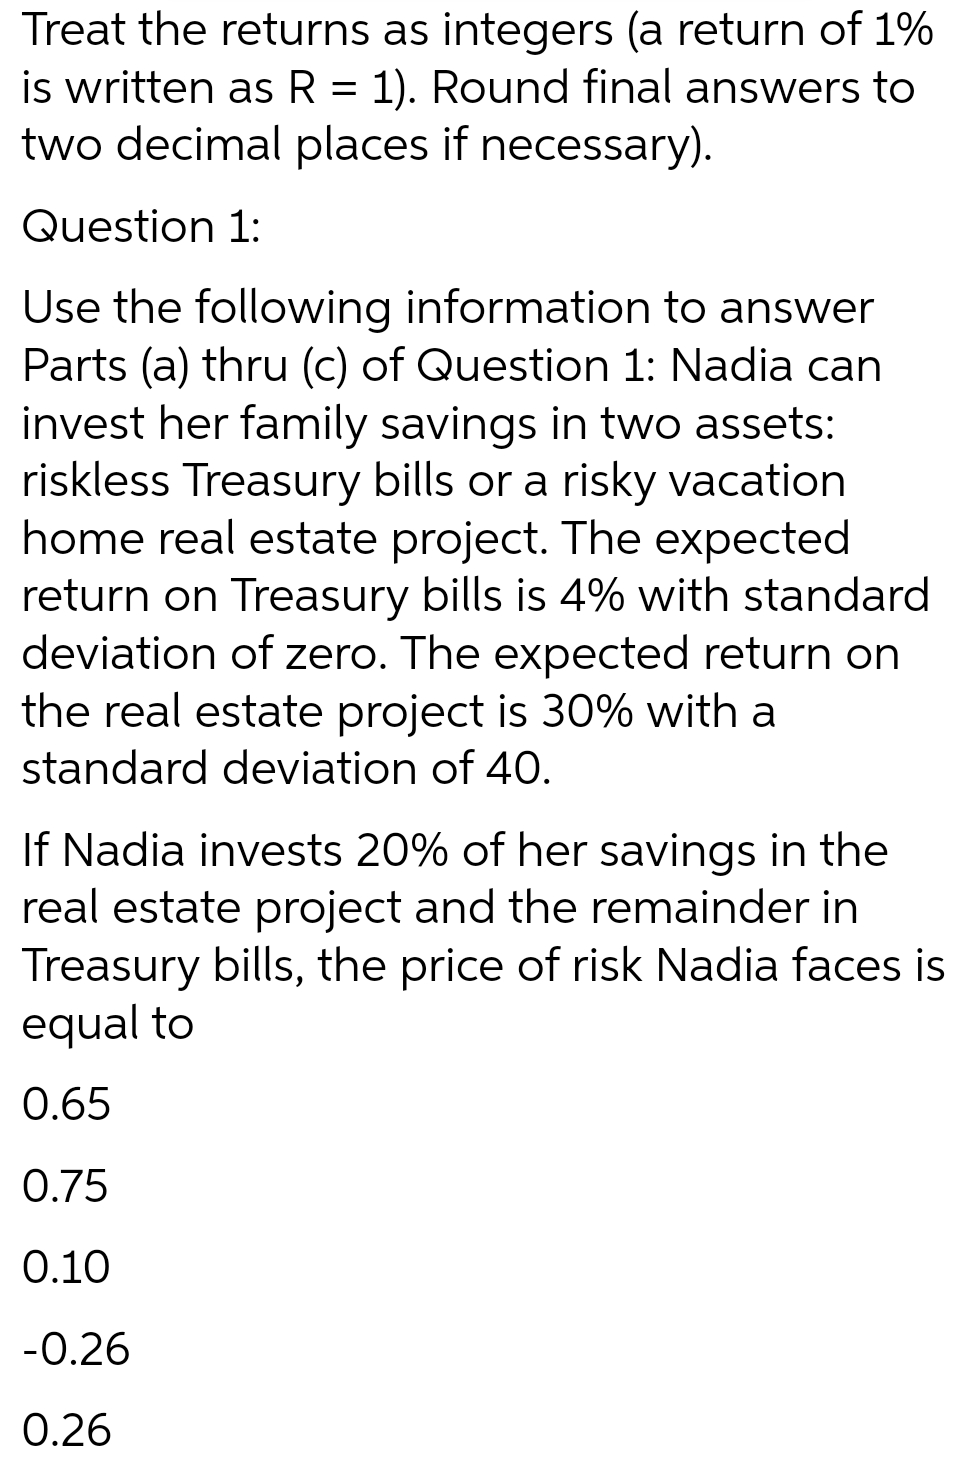 Treat the returns as integers (a return of 1%
is written as R = 1). Round final answers to
two decimal places if necessary).
Question 1:
Use the following information to answer
Parts (a) thru (c) of Question 1: Nadia can
invest her family savings in two assets:
riskless Treasury bills or a risky vacation
home real estate project. The expected
return on Treasury bills is 4% with standard
deviation of zero. The expected return on
the real estate project is 30% with a
standard deviation of 40.
If Nadia invests 20% of her savings in the
real estate project and the remainder in
Treasury bills, the price of risk Nadia faces is
equal to
0.65
0.75
0.10
-0.26
0.26
